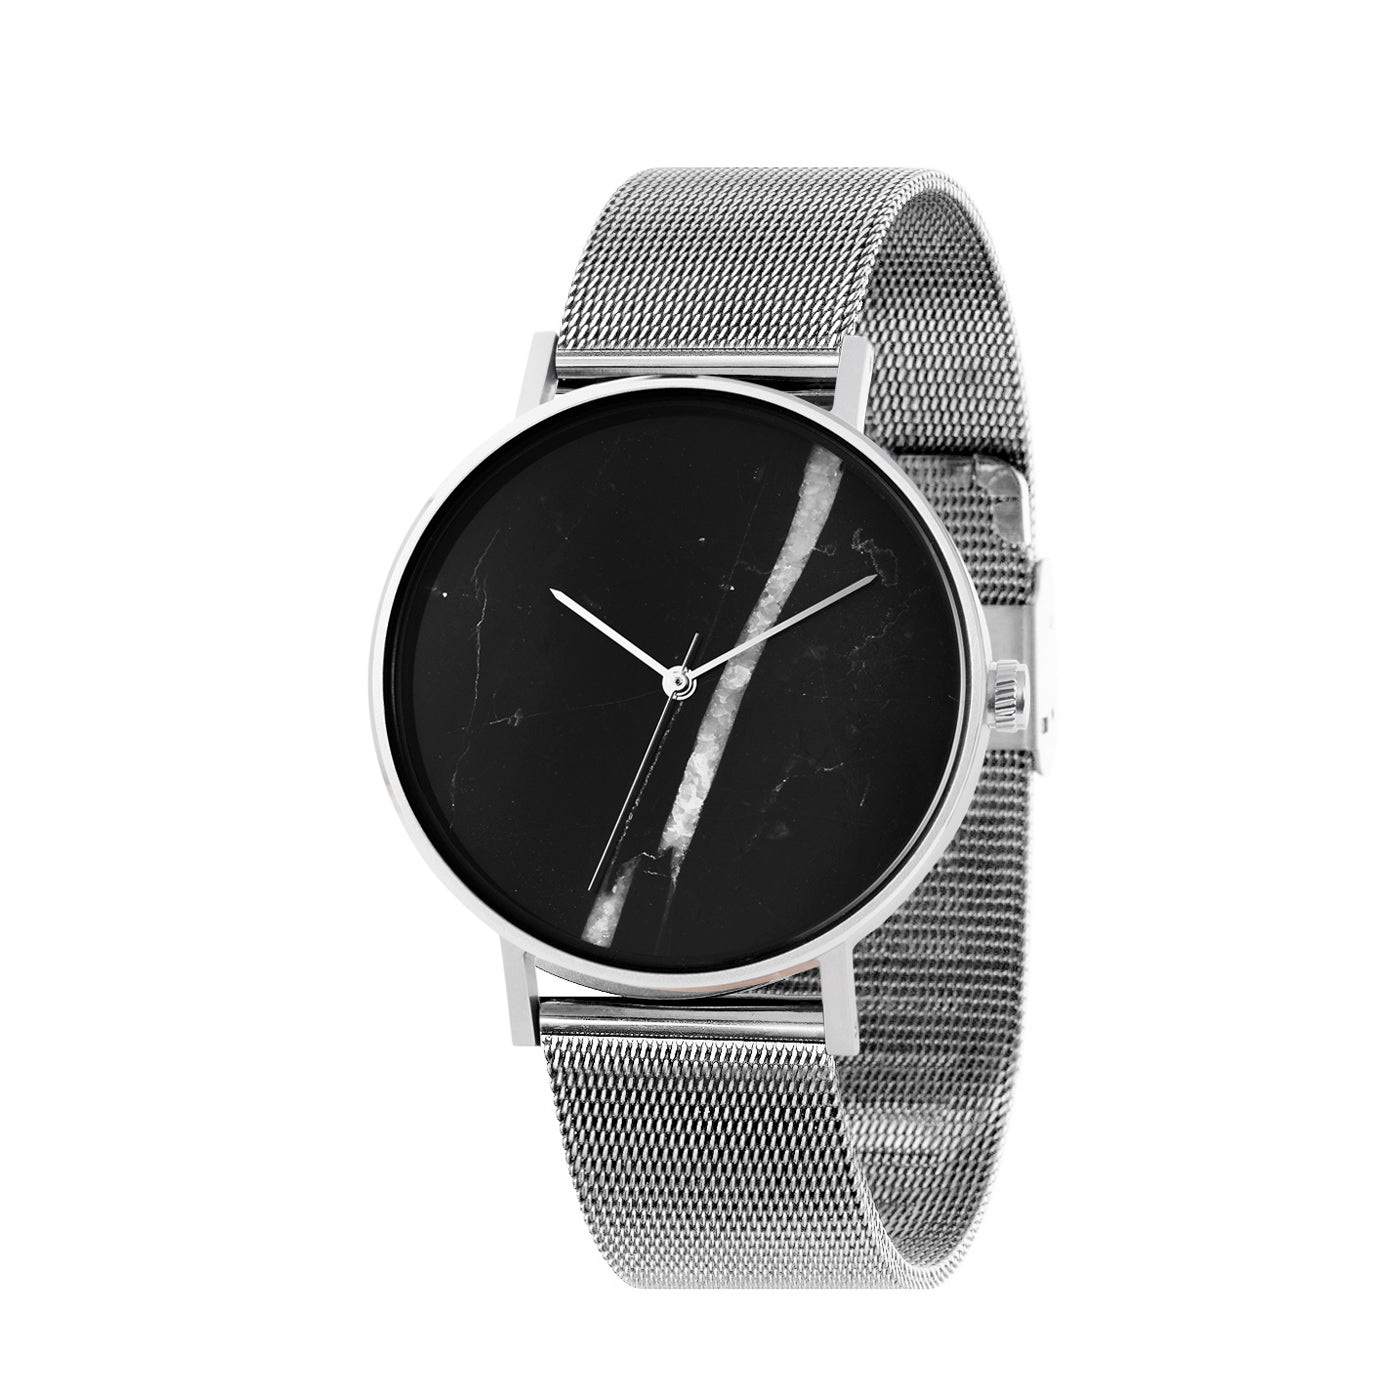 THE STONE -  BLACK ONYX DIAL / SILVER MESH BAND WATCH